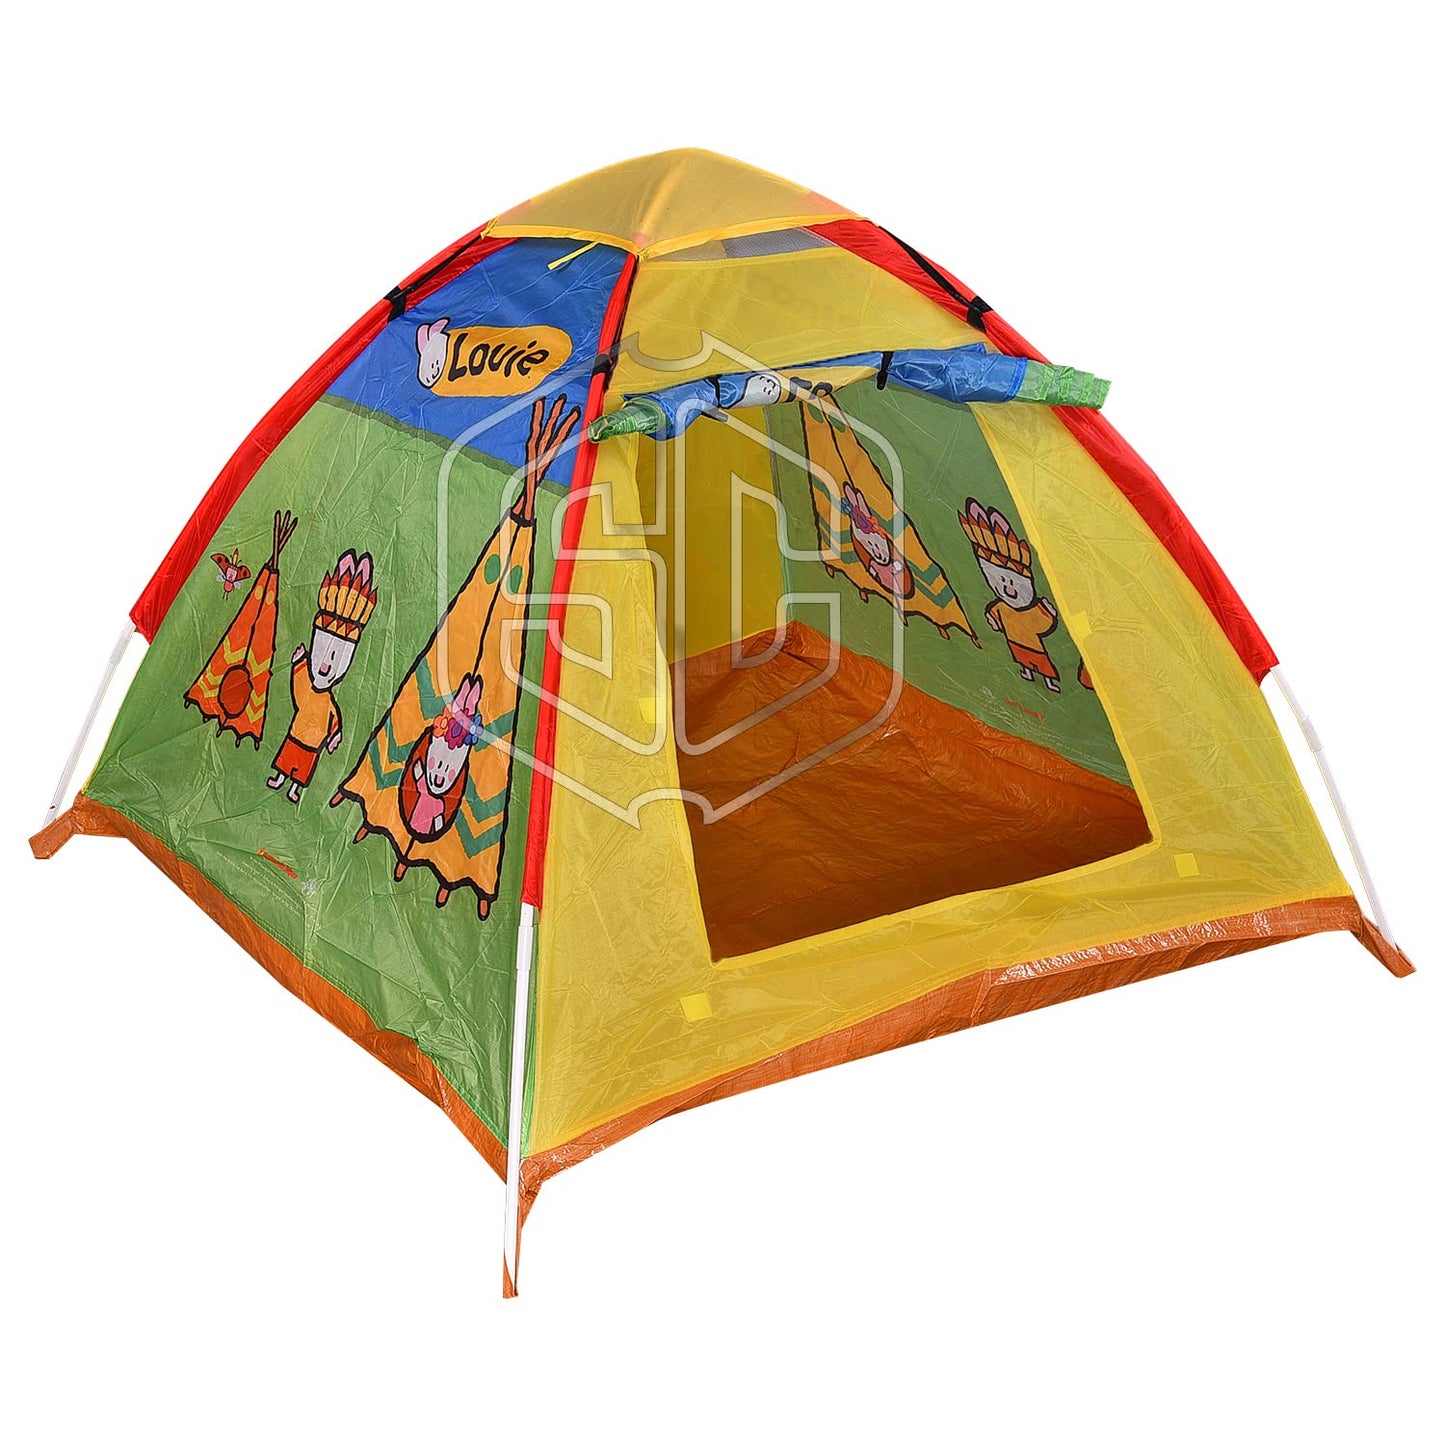 Play Tent For Kids, Play Tunnel, Kids Tent, Children's Tent